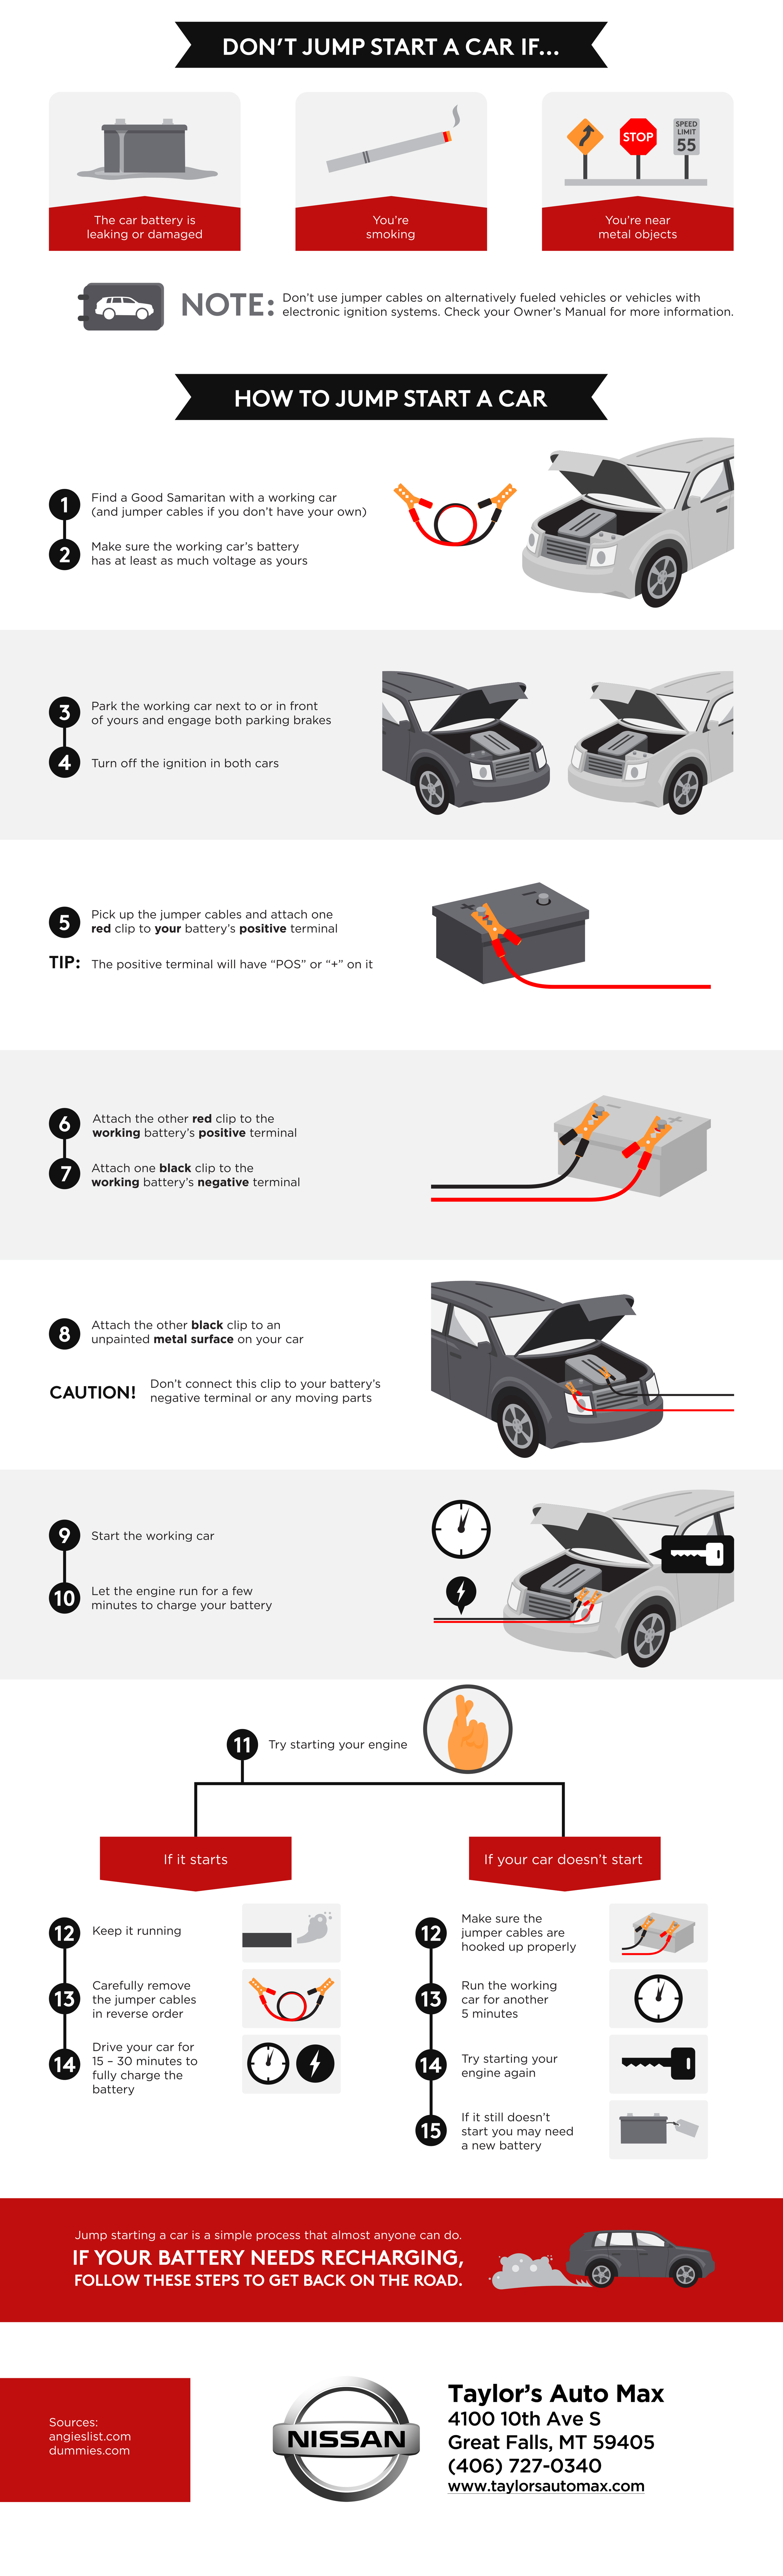 An infographic detailing how to jump start your car | Taylor's Auto Max